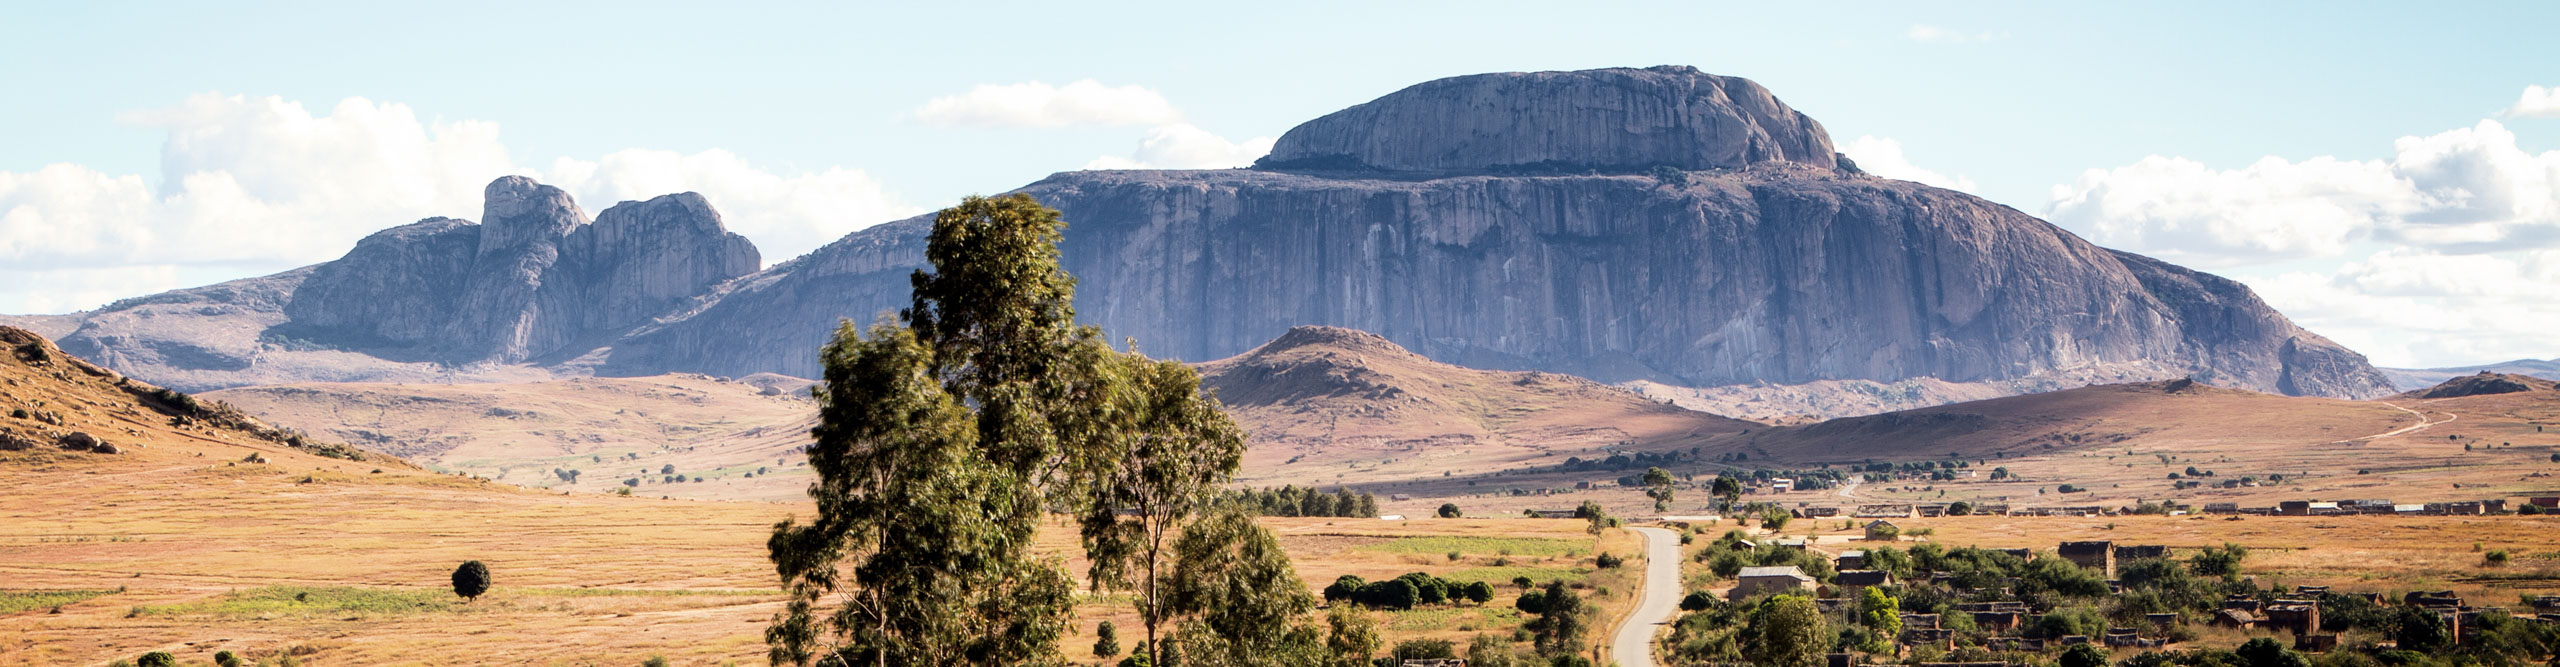 View of the iconic Bishops Hat Mountain in Madagascar on a clear sunny day, Africa